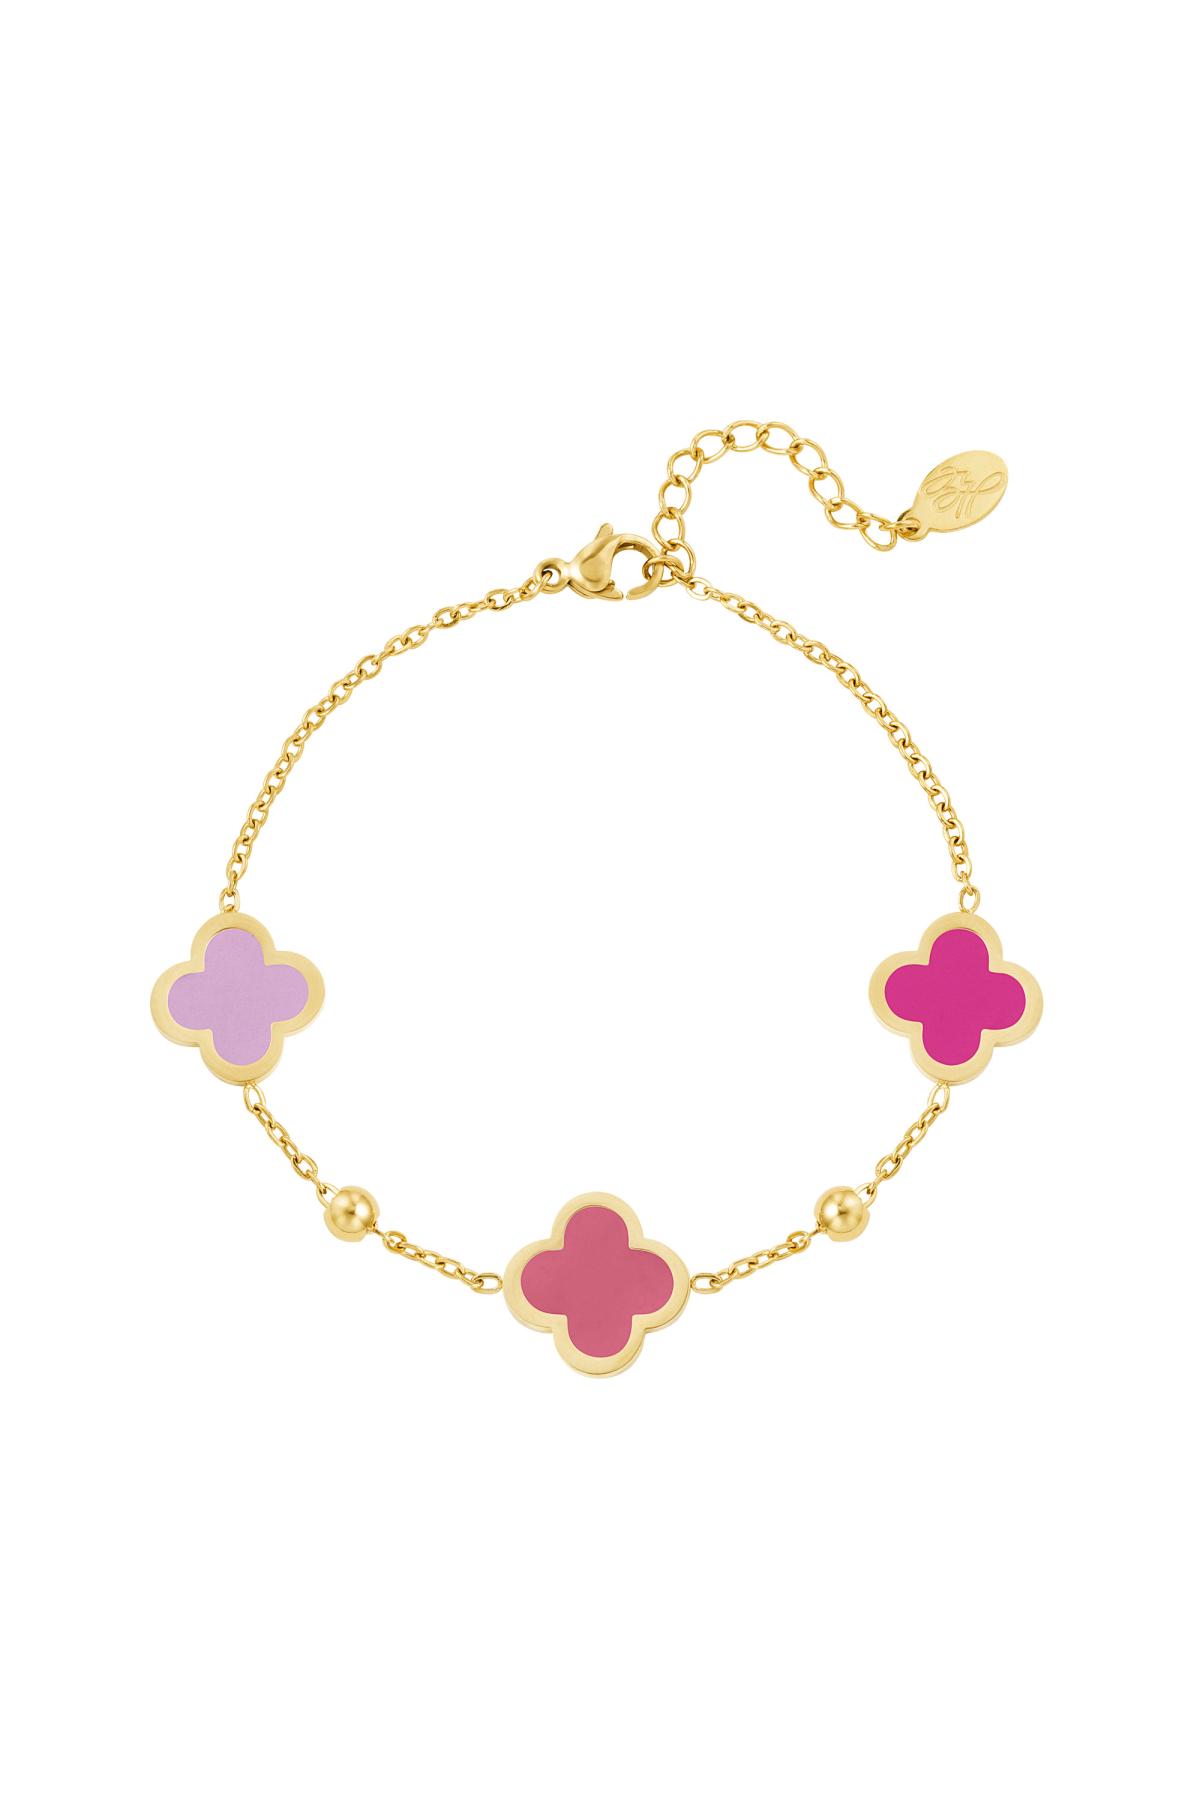 Bracelet three clovers Pink &amp; Gold Stainless Steel